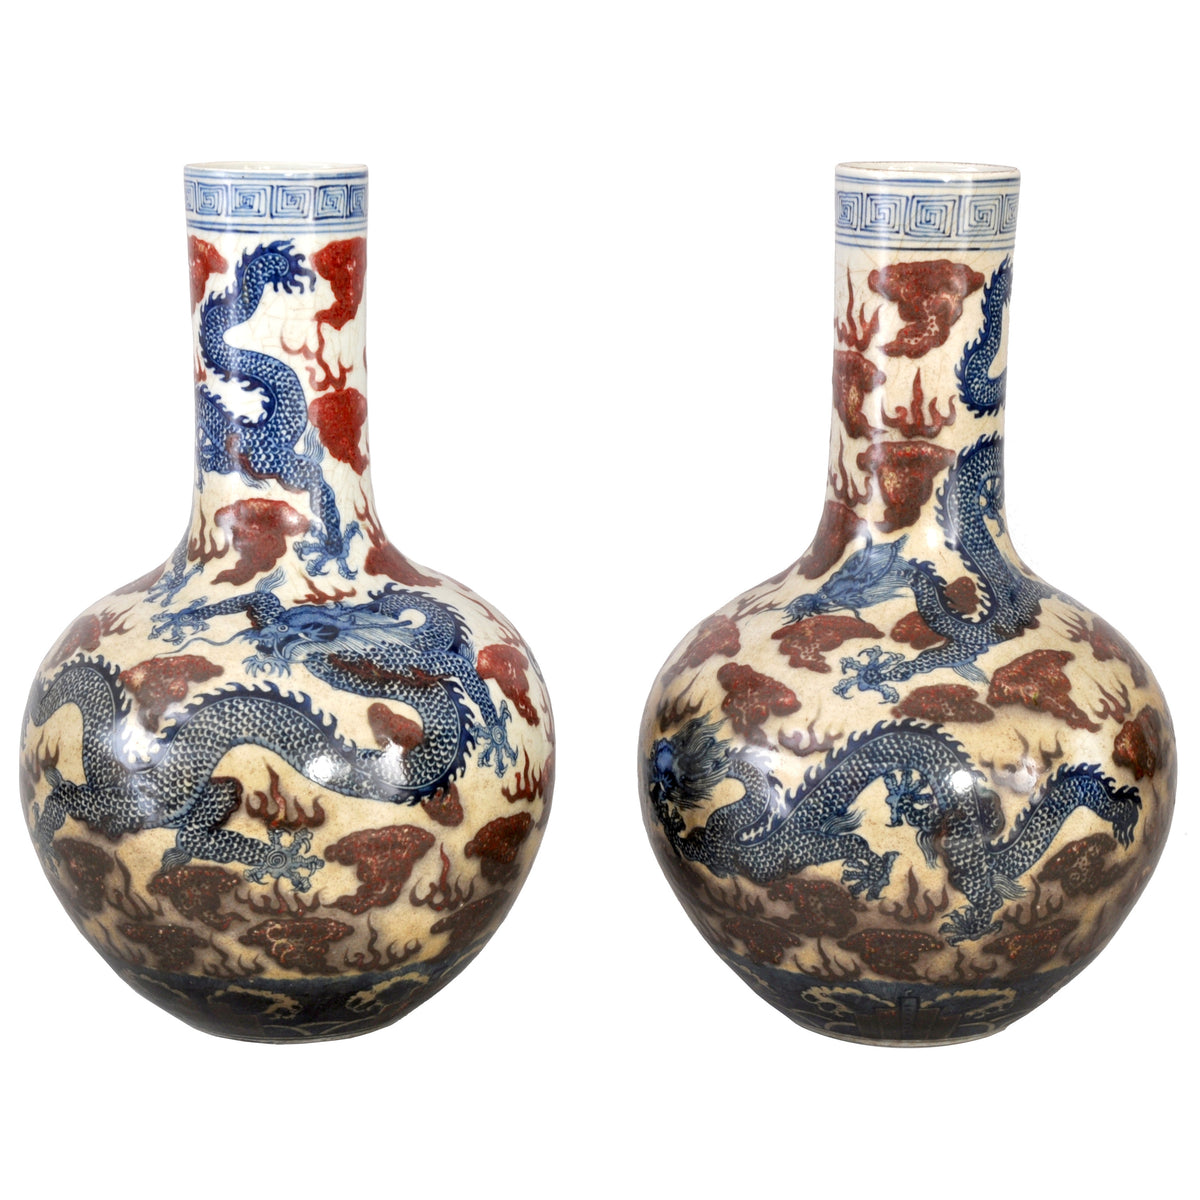 Pair of Large Antique Chinese Qing Dynasty Porcelain Blue & White Dragon Vases, circa 1880